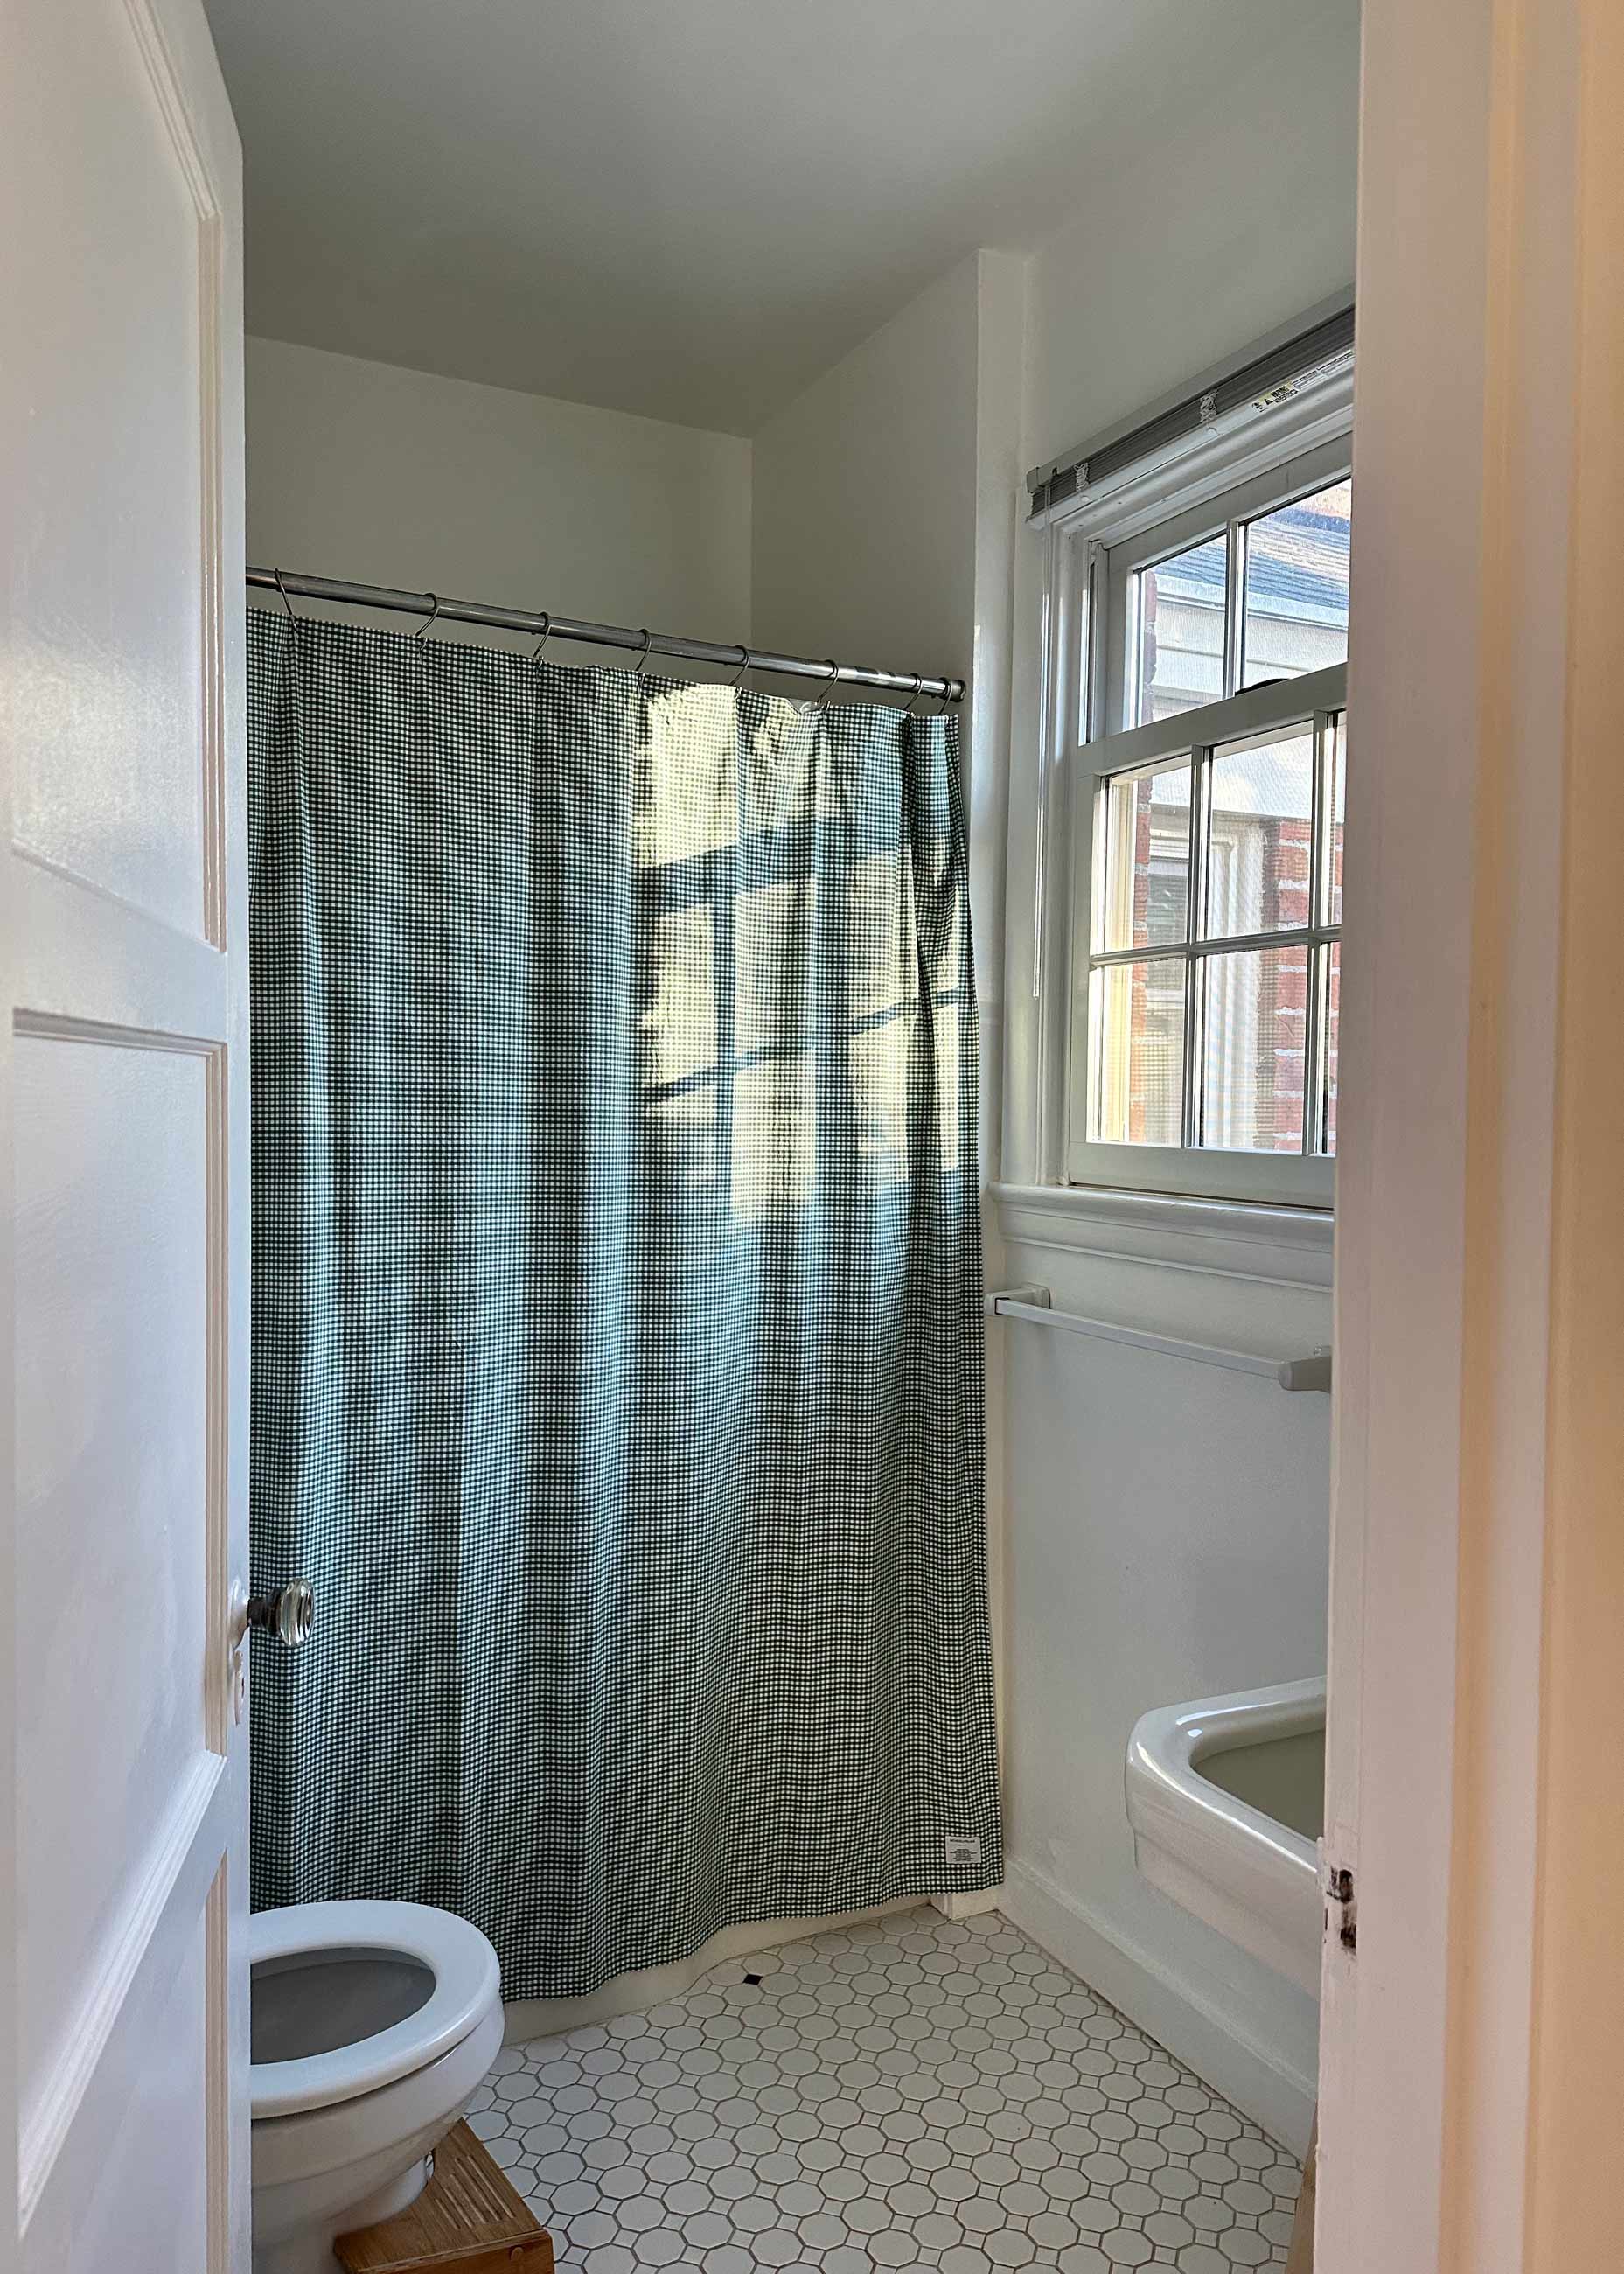 Before image of bathroom featuring the shower. 